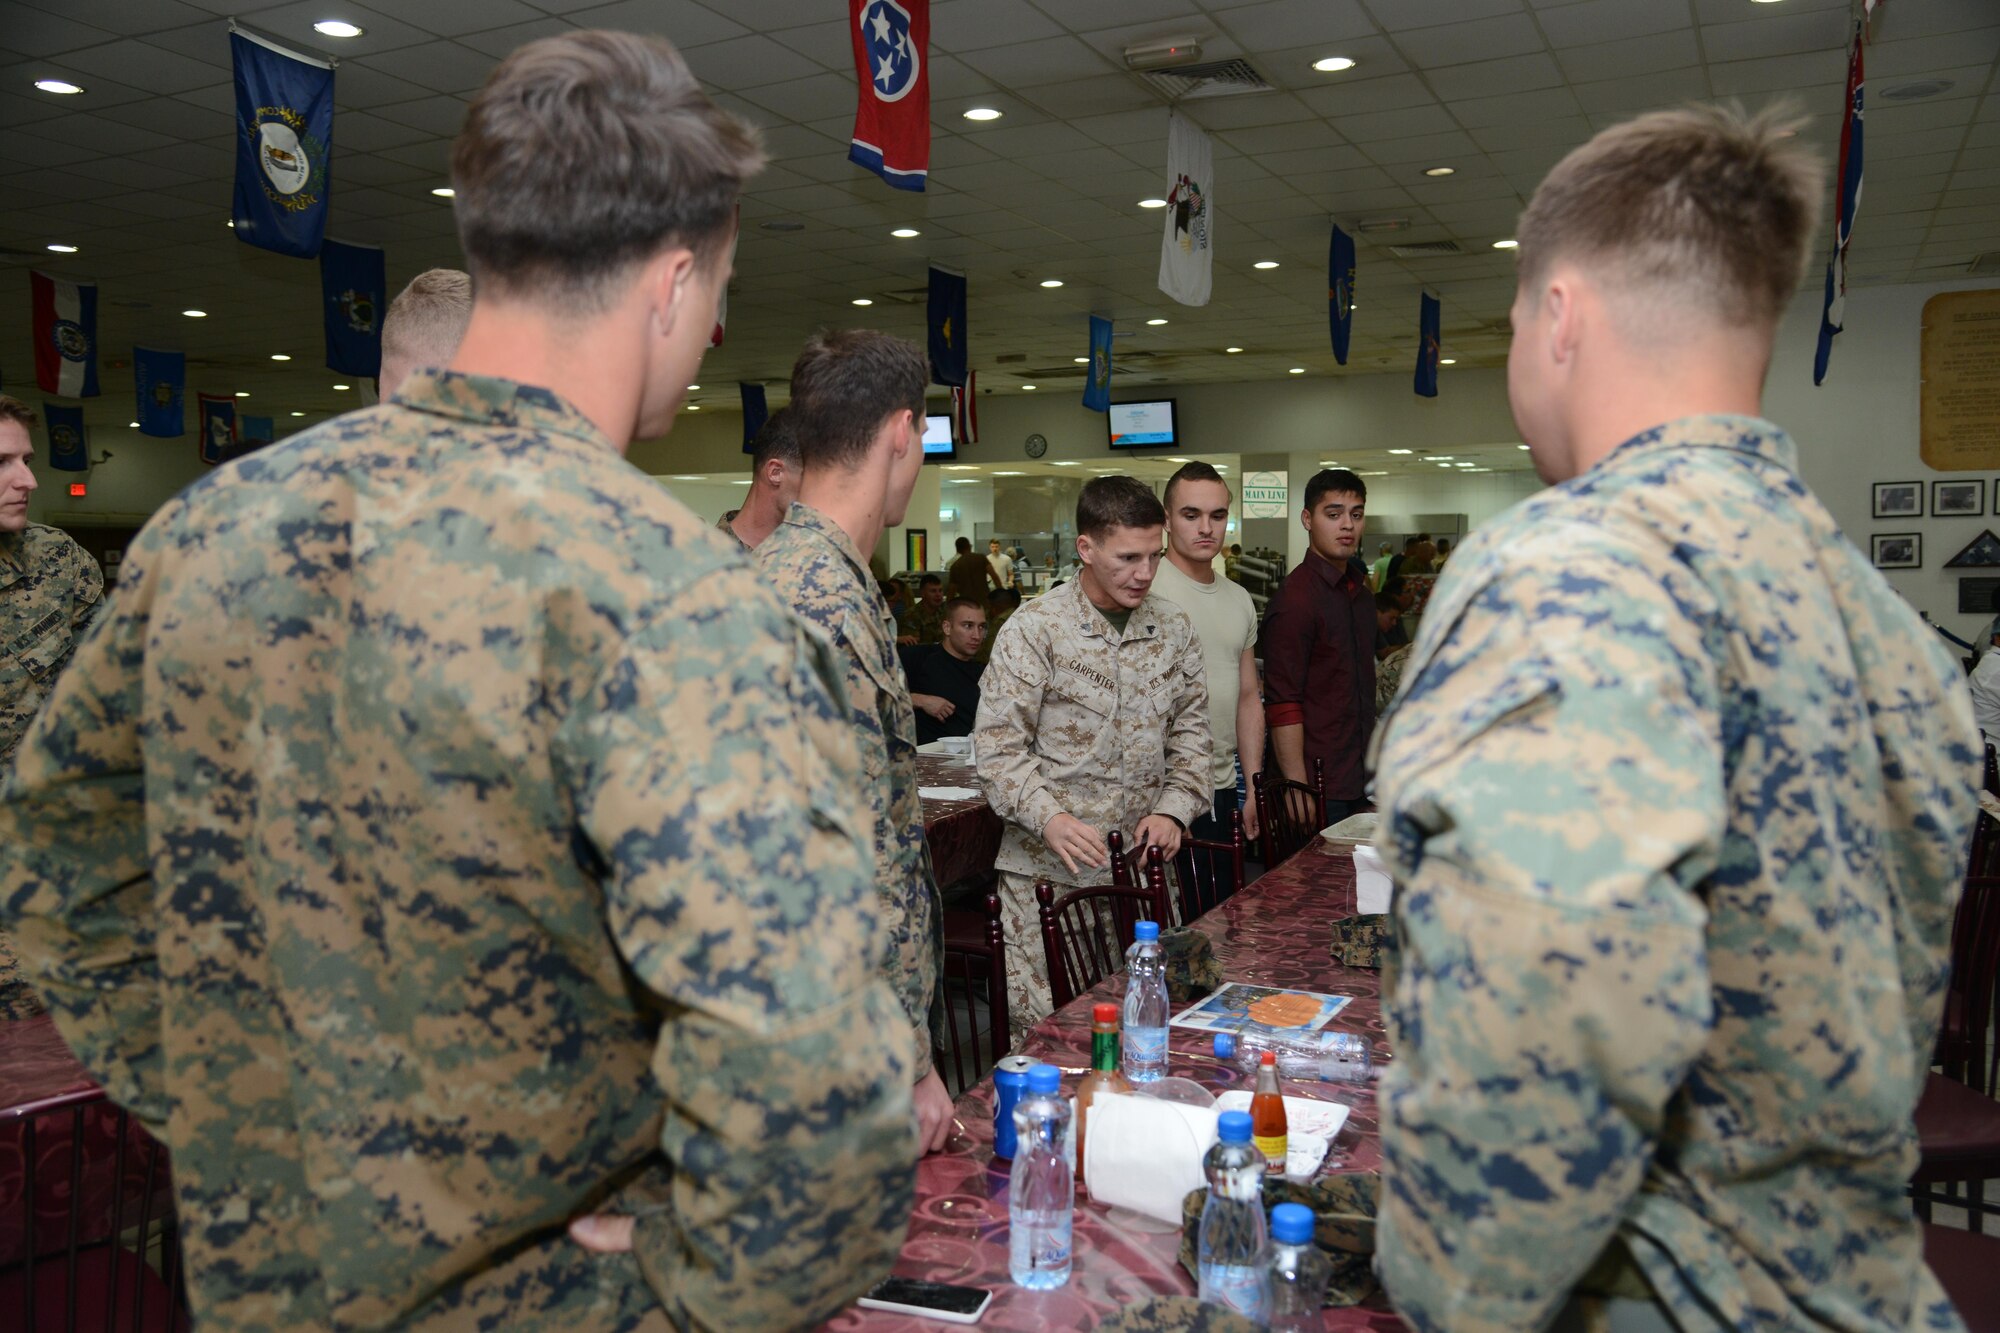 Medal of Honor recipient, retired Marine Cpl. Kyle Carpenter, talks to Marines at The Rock’s Desert Winds dining facility April 18, 2015. Carpenter was transitioning through the base after a five-day visit to Afghanistan as part of Operation Proper Exit. Operation Proper Exit, part of the Troops First Foundation, provides the opportunity for wounded warriors to return to the battle space, share their experiences. (U.S. Air Force photo by Tech. Sgt. Jared Marquis/released)